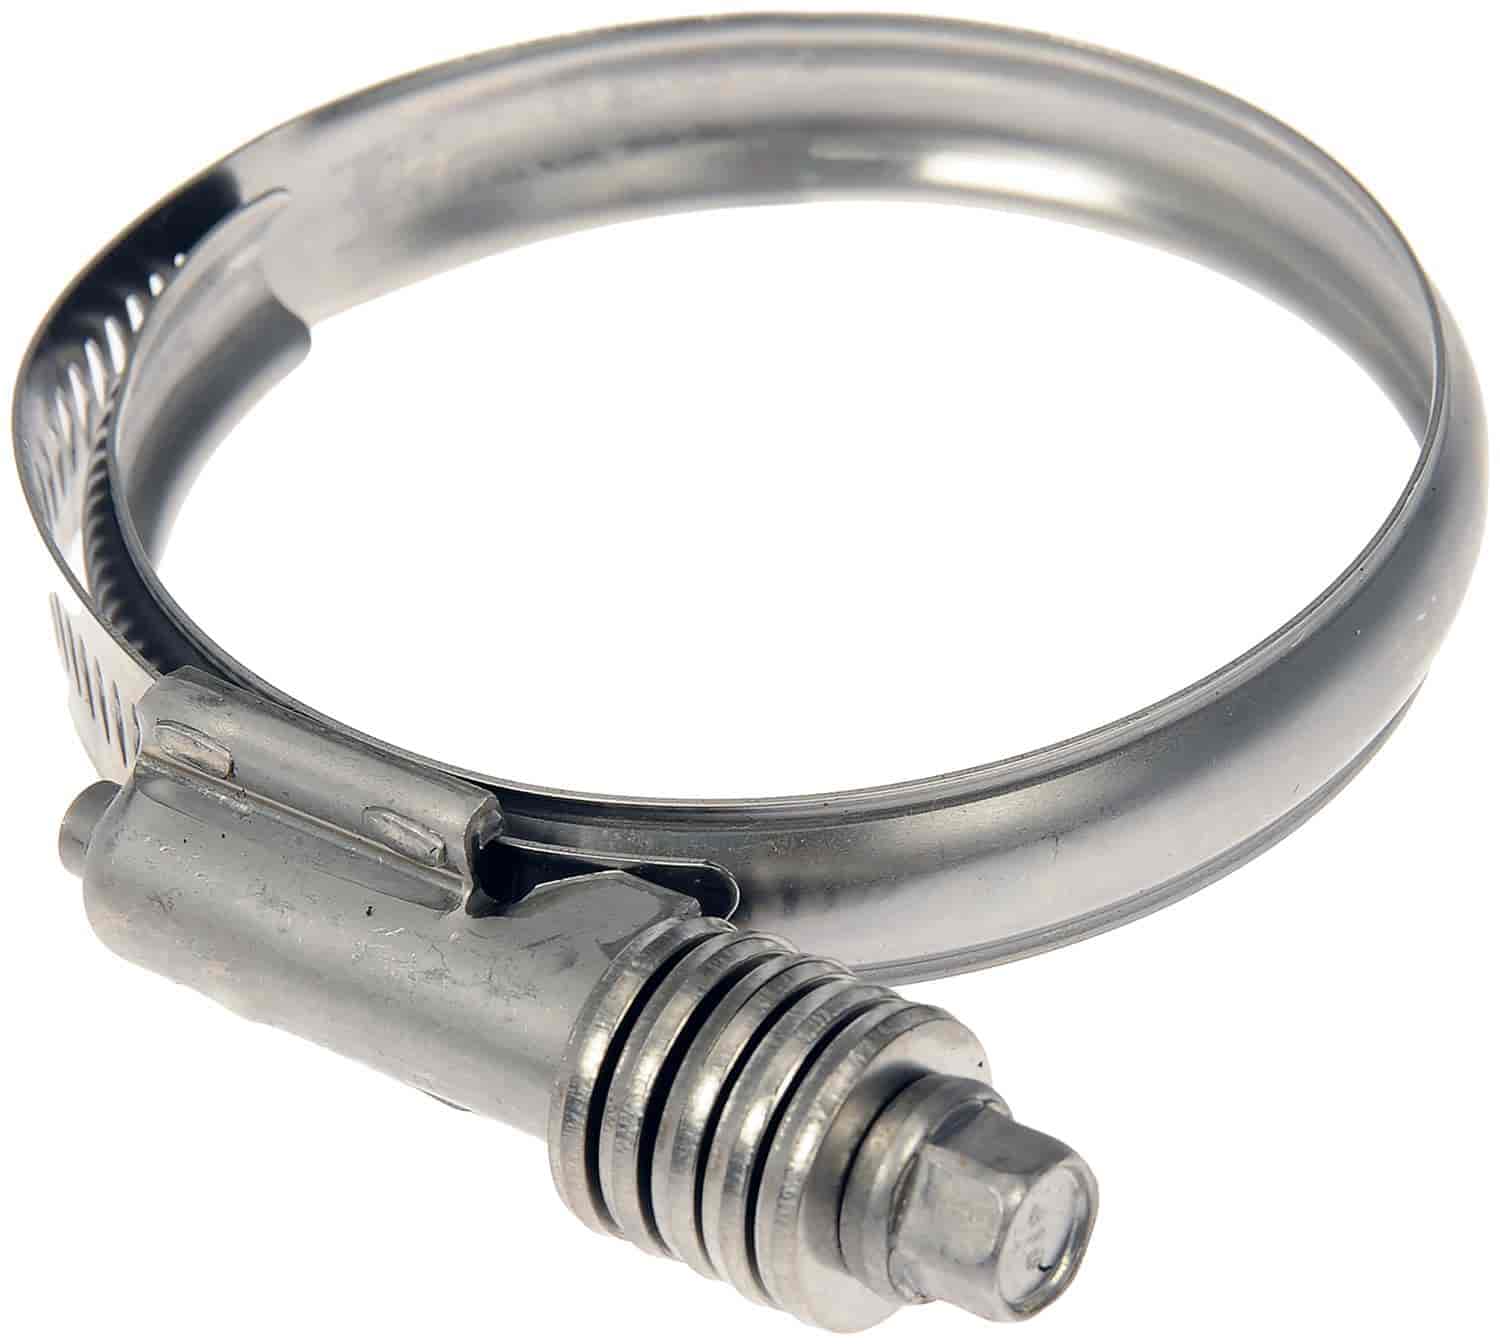 Power Band Intercooler Hose Clamp 2 1/2 in. to 3 in.